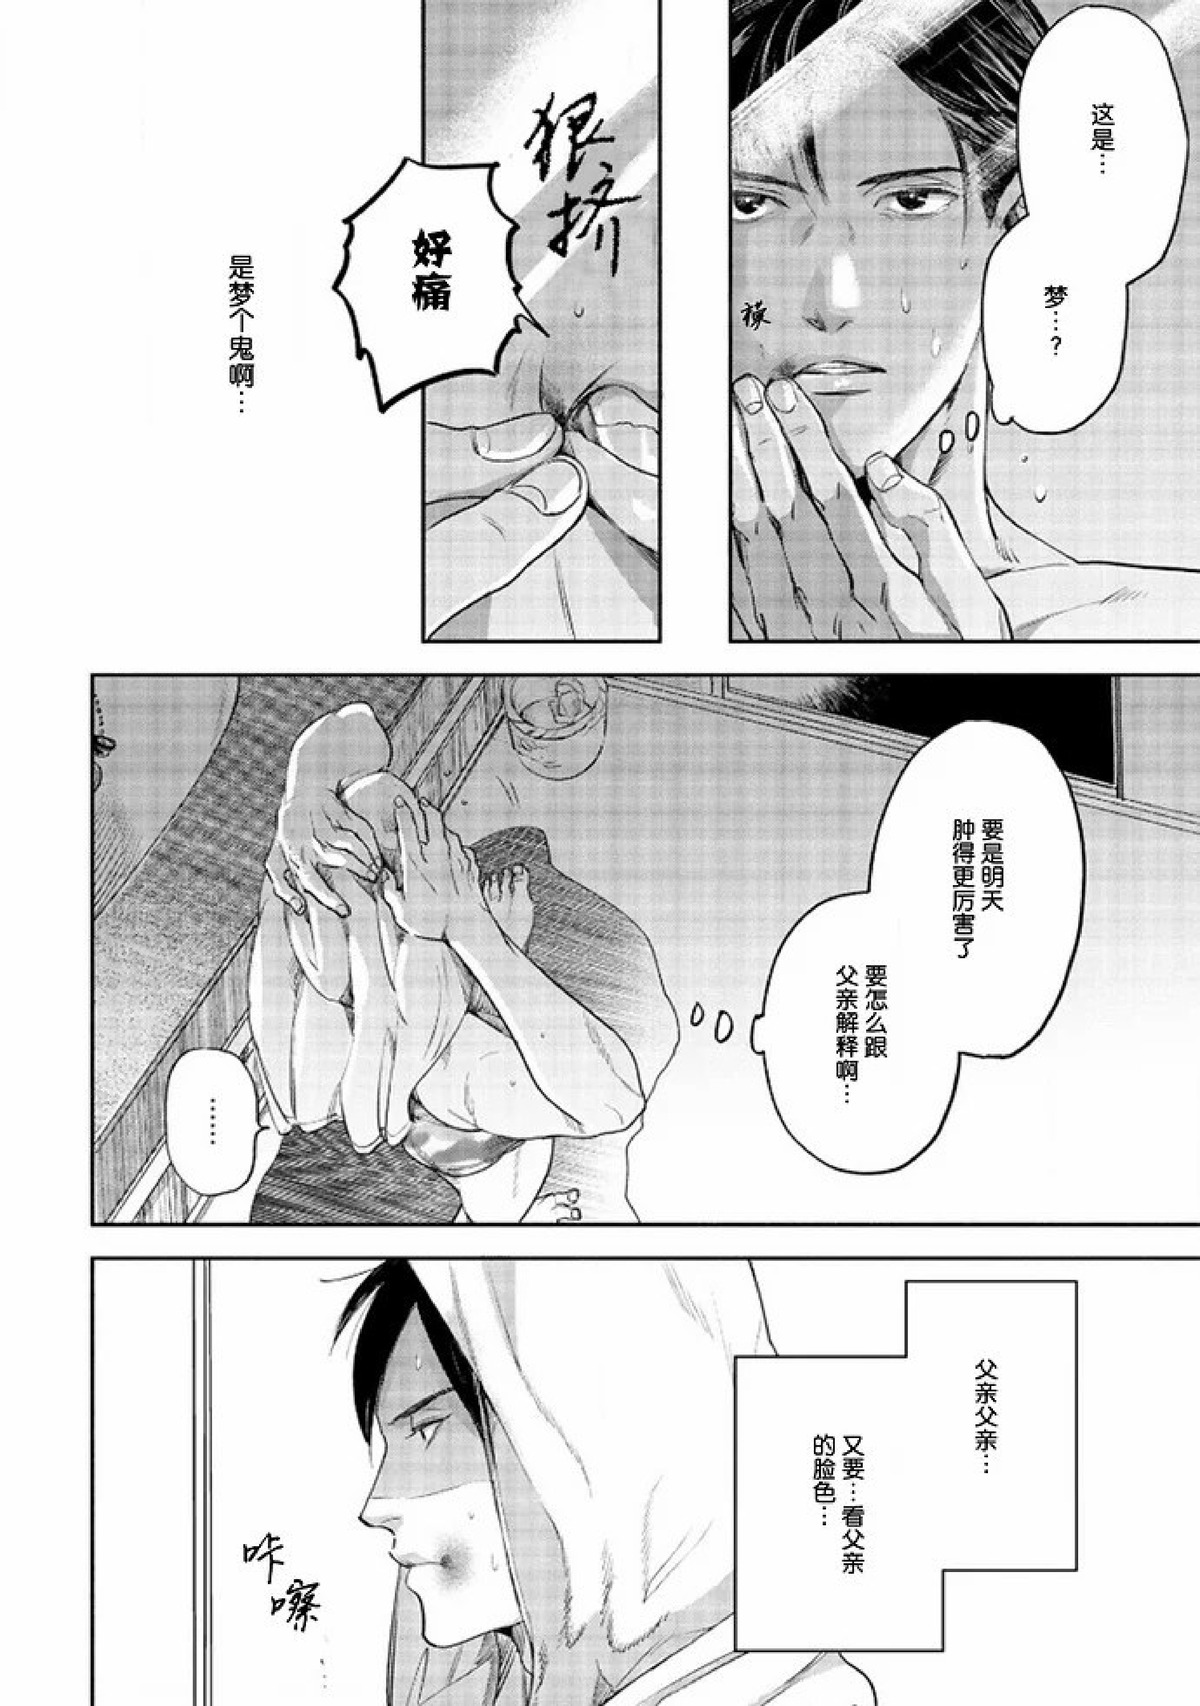 【Two sides of the same coin[腐漫]】漫画-（上卷01-02）章节漫画下拉式图片-84.jpg